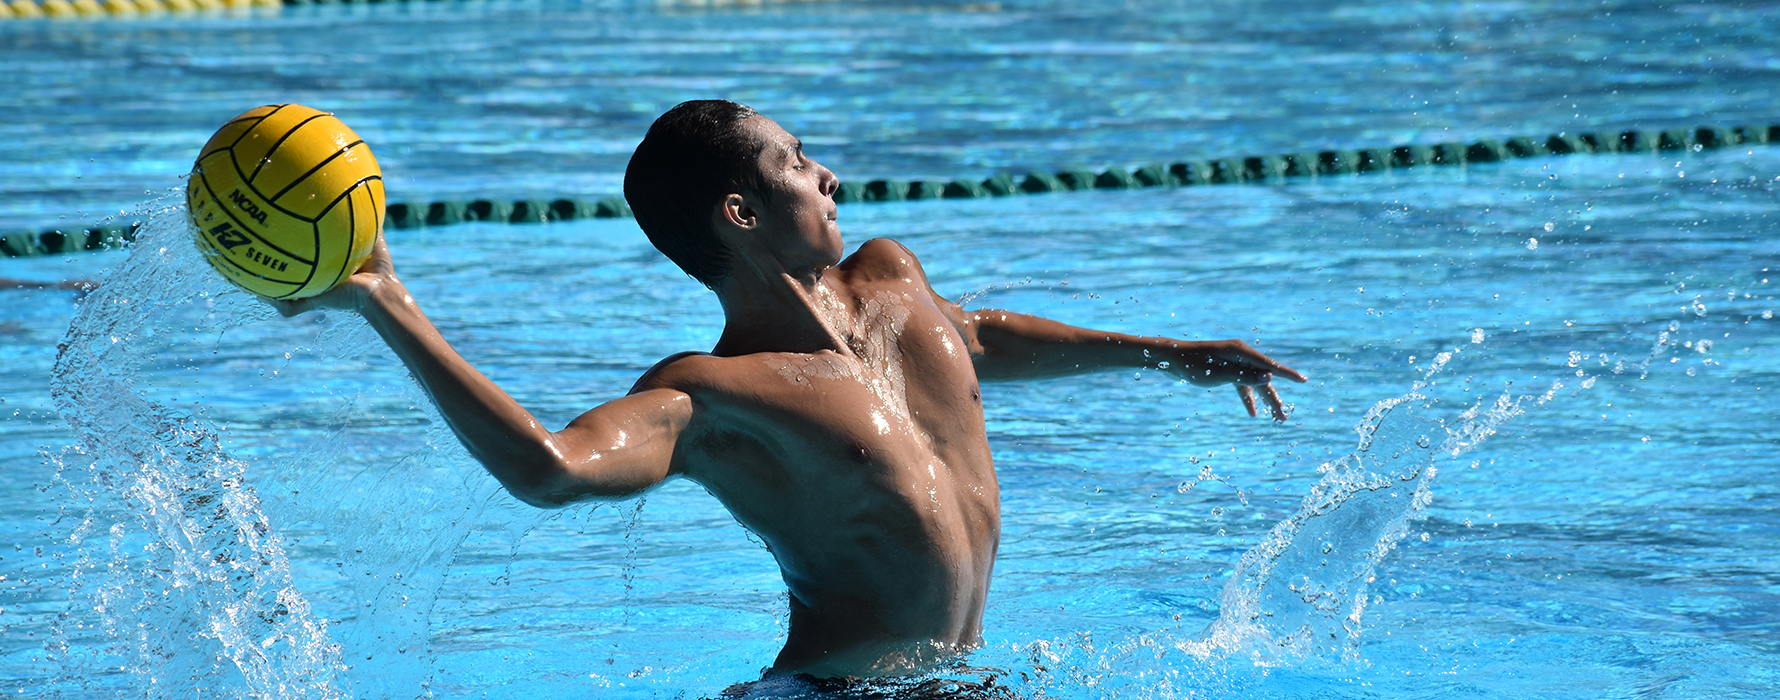 Water polo player throwing ball